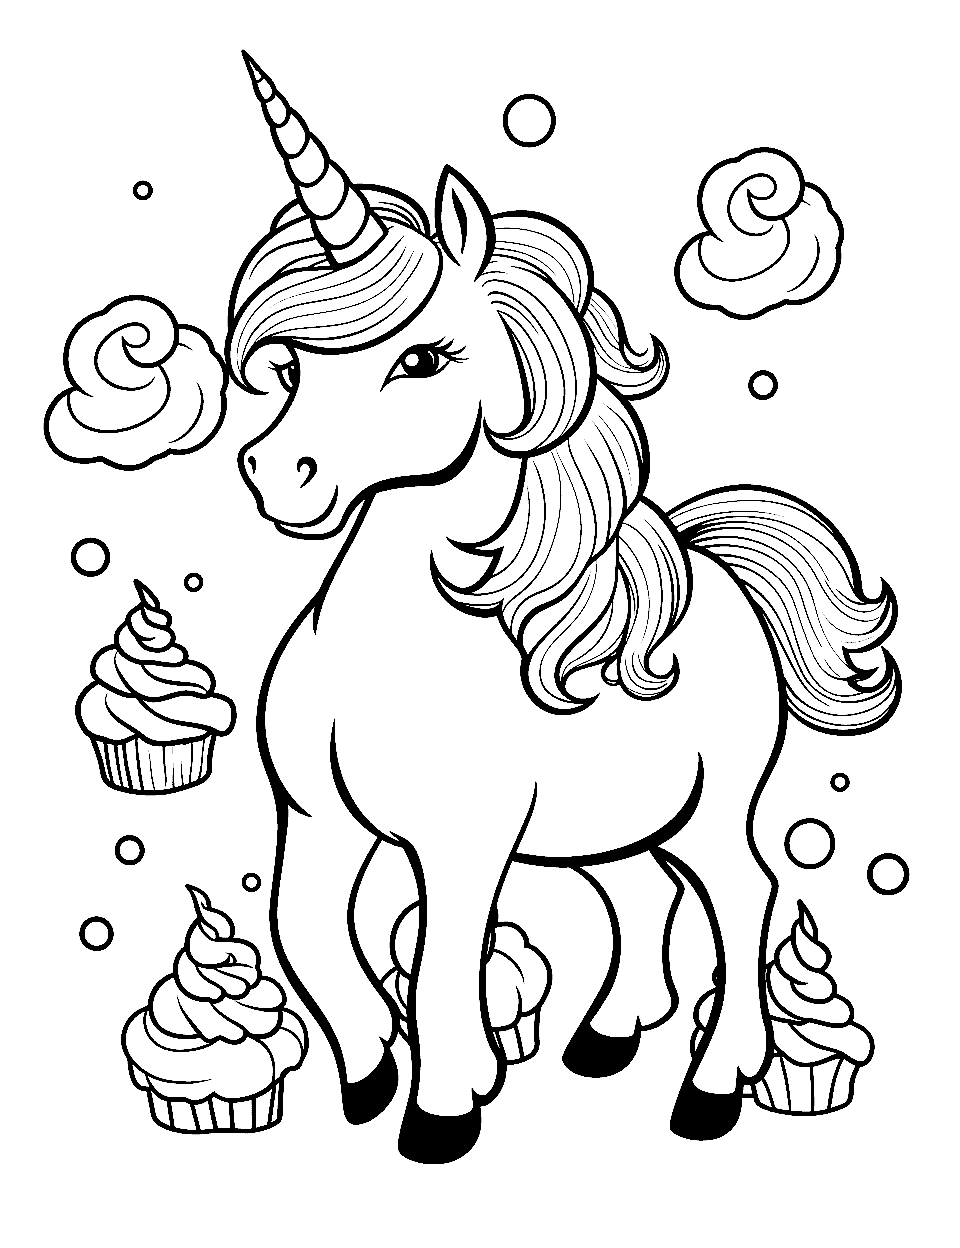 Cupcake Unicorn Coloring Page - A delightful unicorn surrounded by large cupcakes.